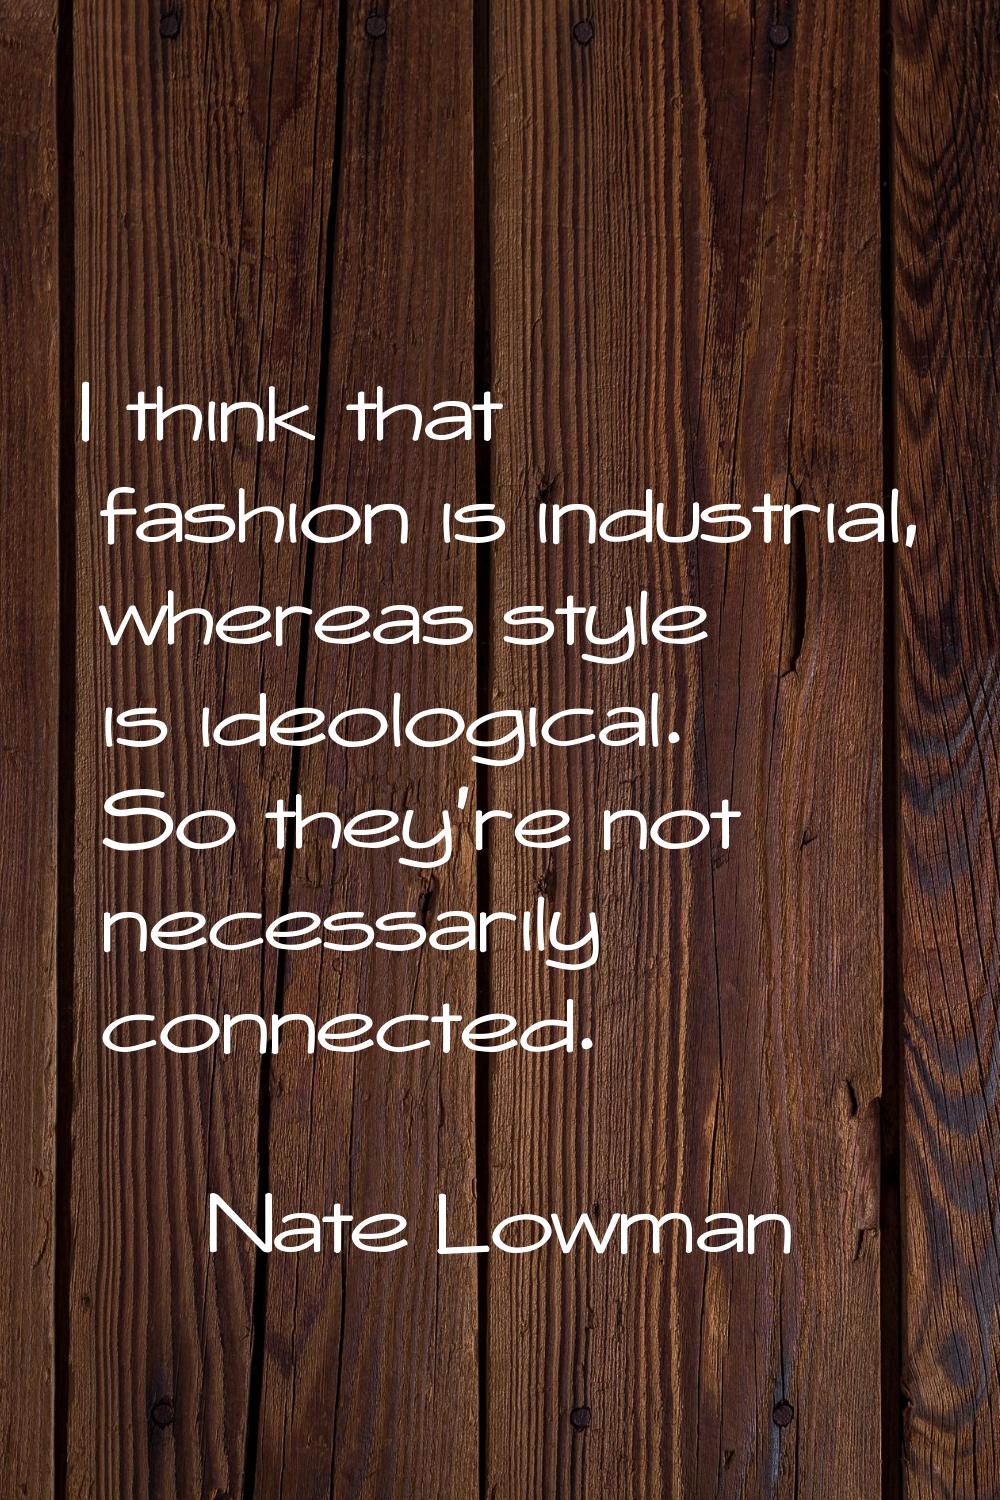 I think that fashion is industrial, whereas style is ideological. So they're not necessarily connec